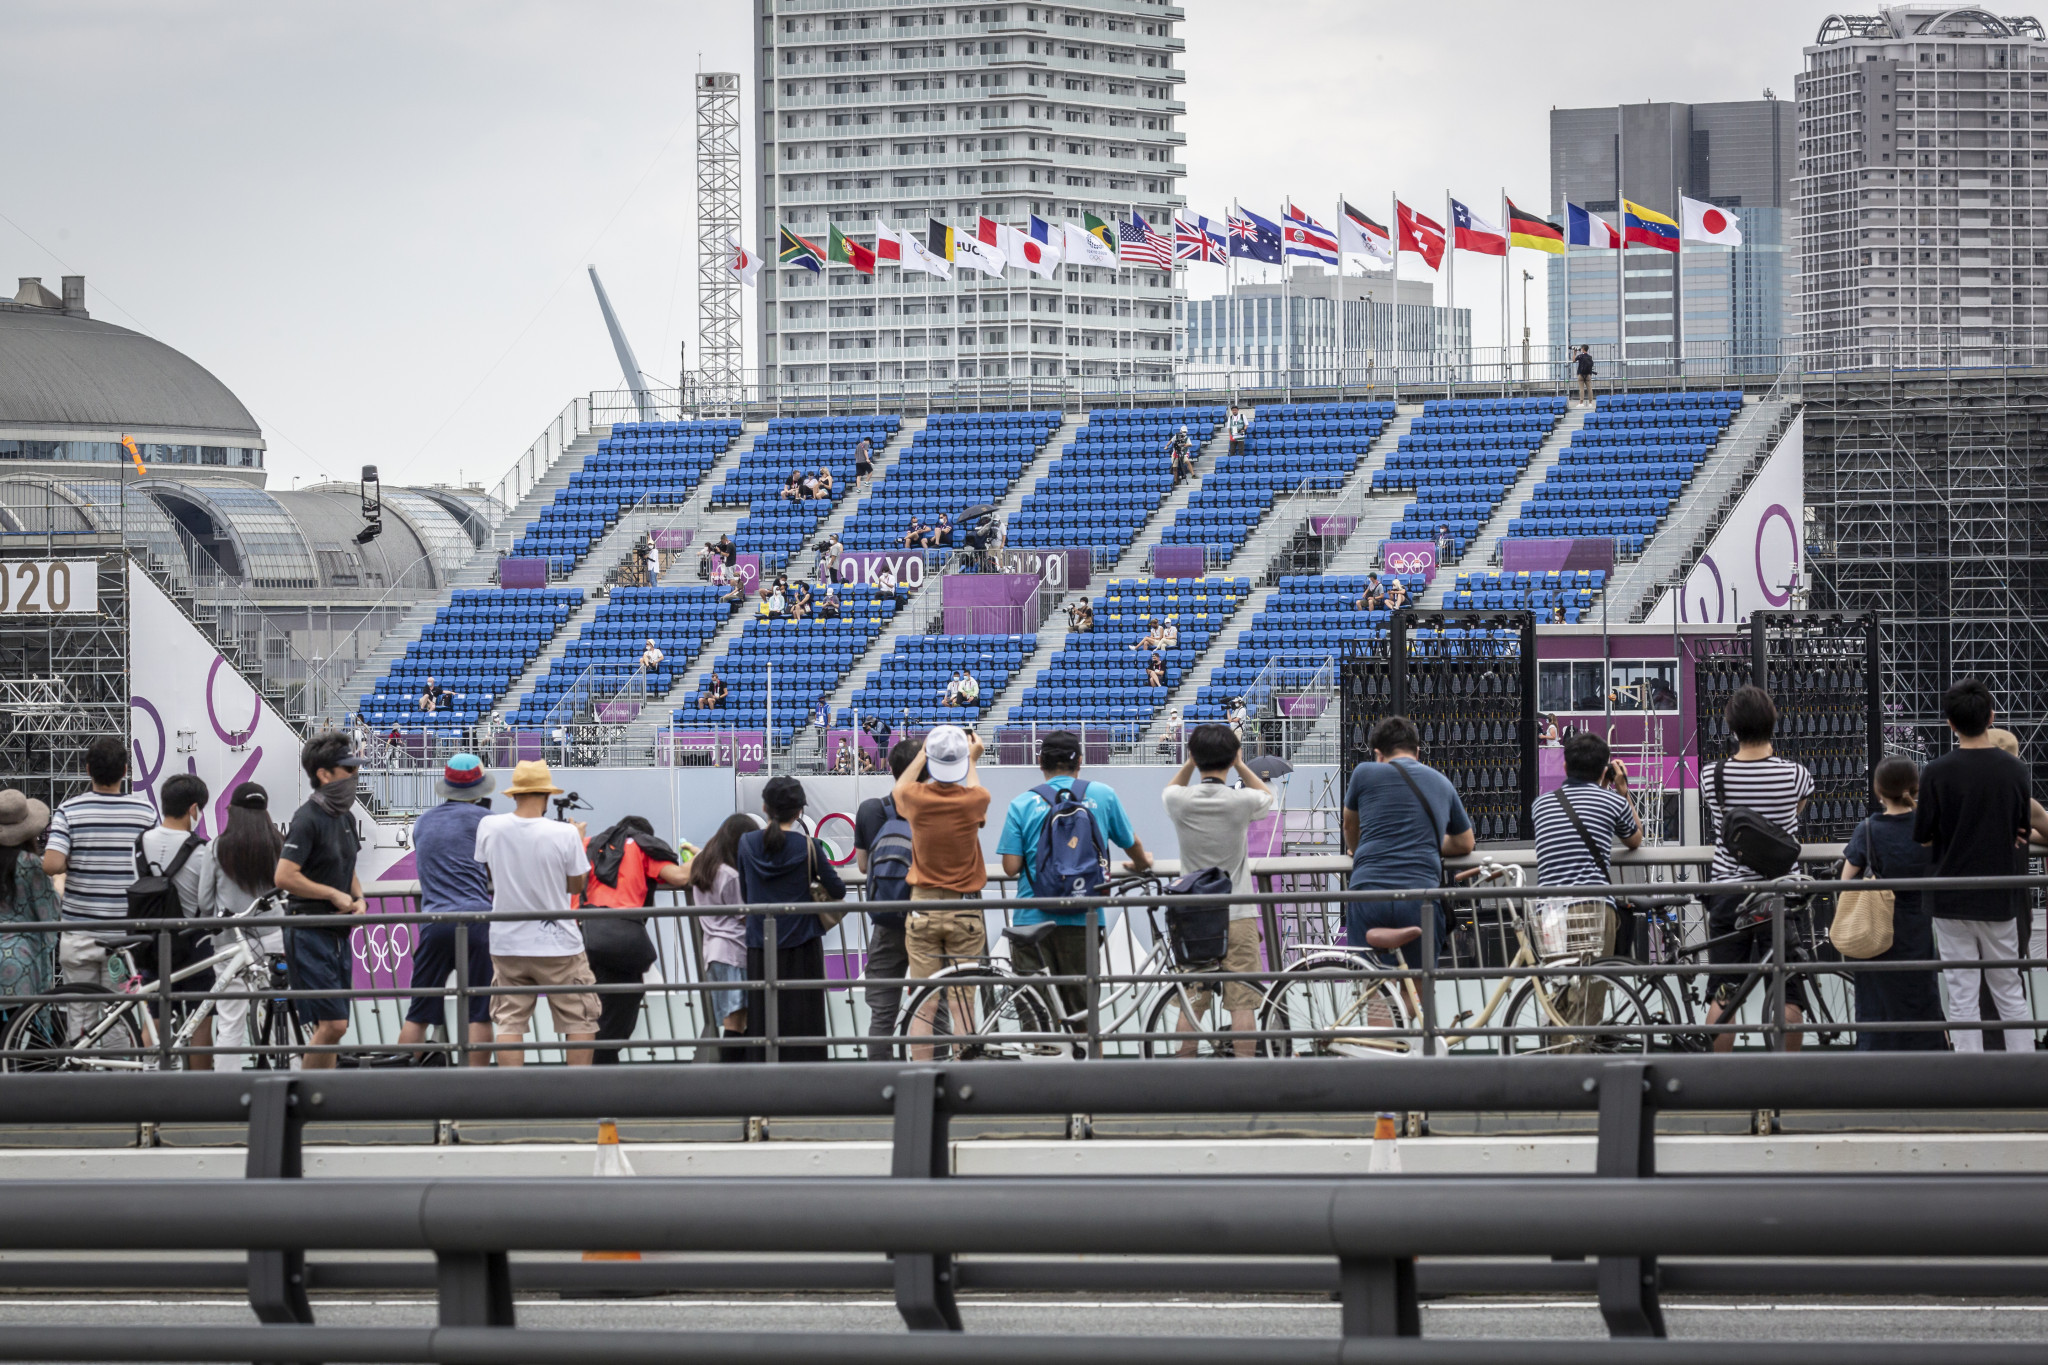 Urban sports were a popular addition to the Olympic programme at Tokyo 2020, although people were forced to try to sneak a look from outside the venue because spectators were banned due to COVID-19 ©Getty Images